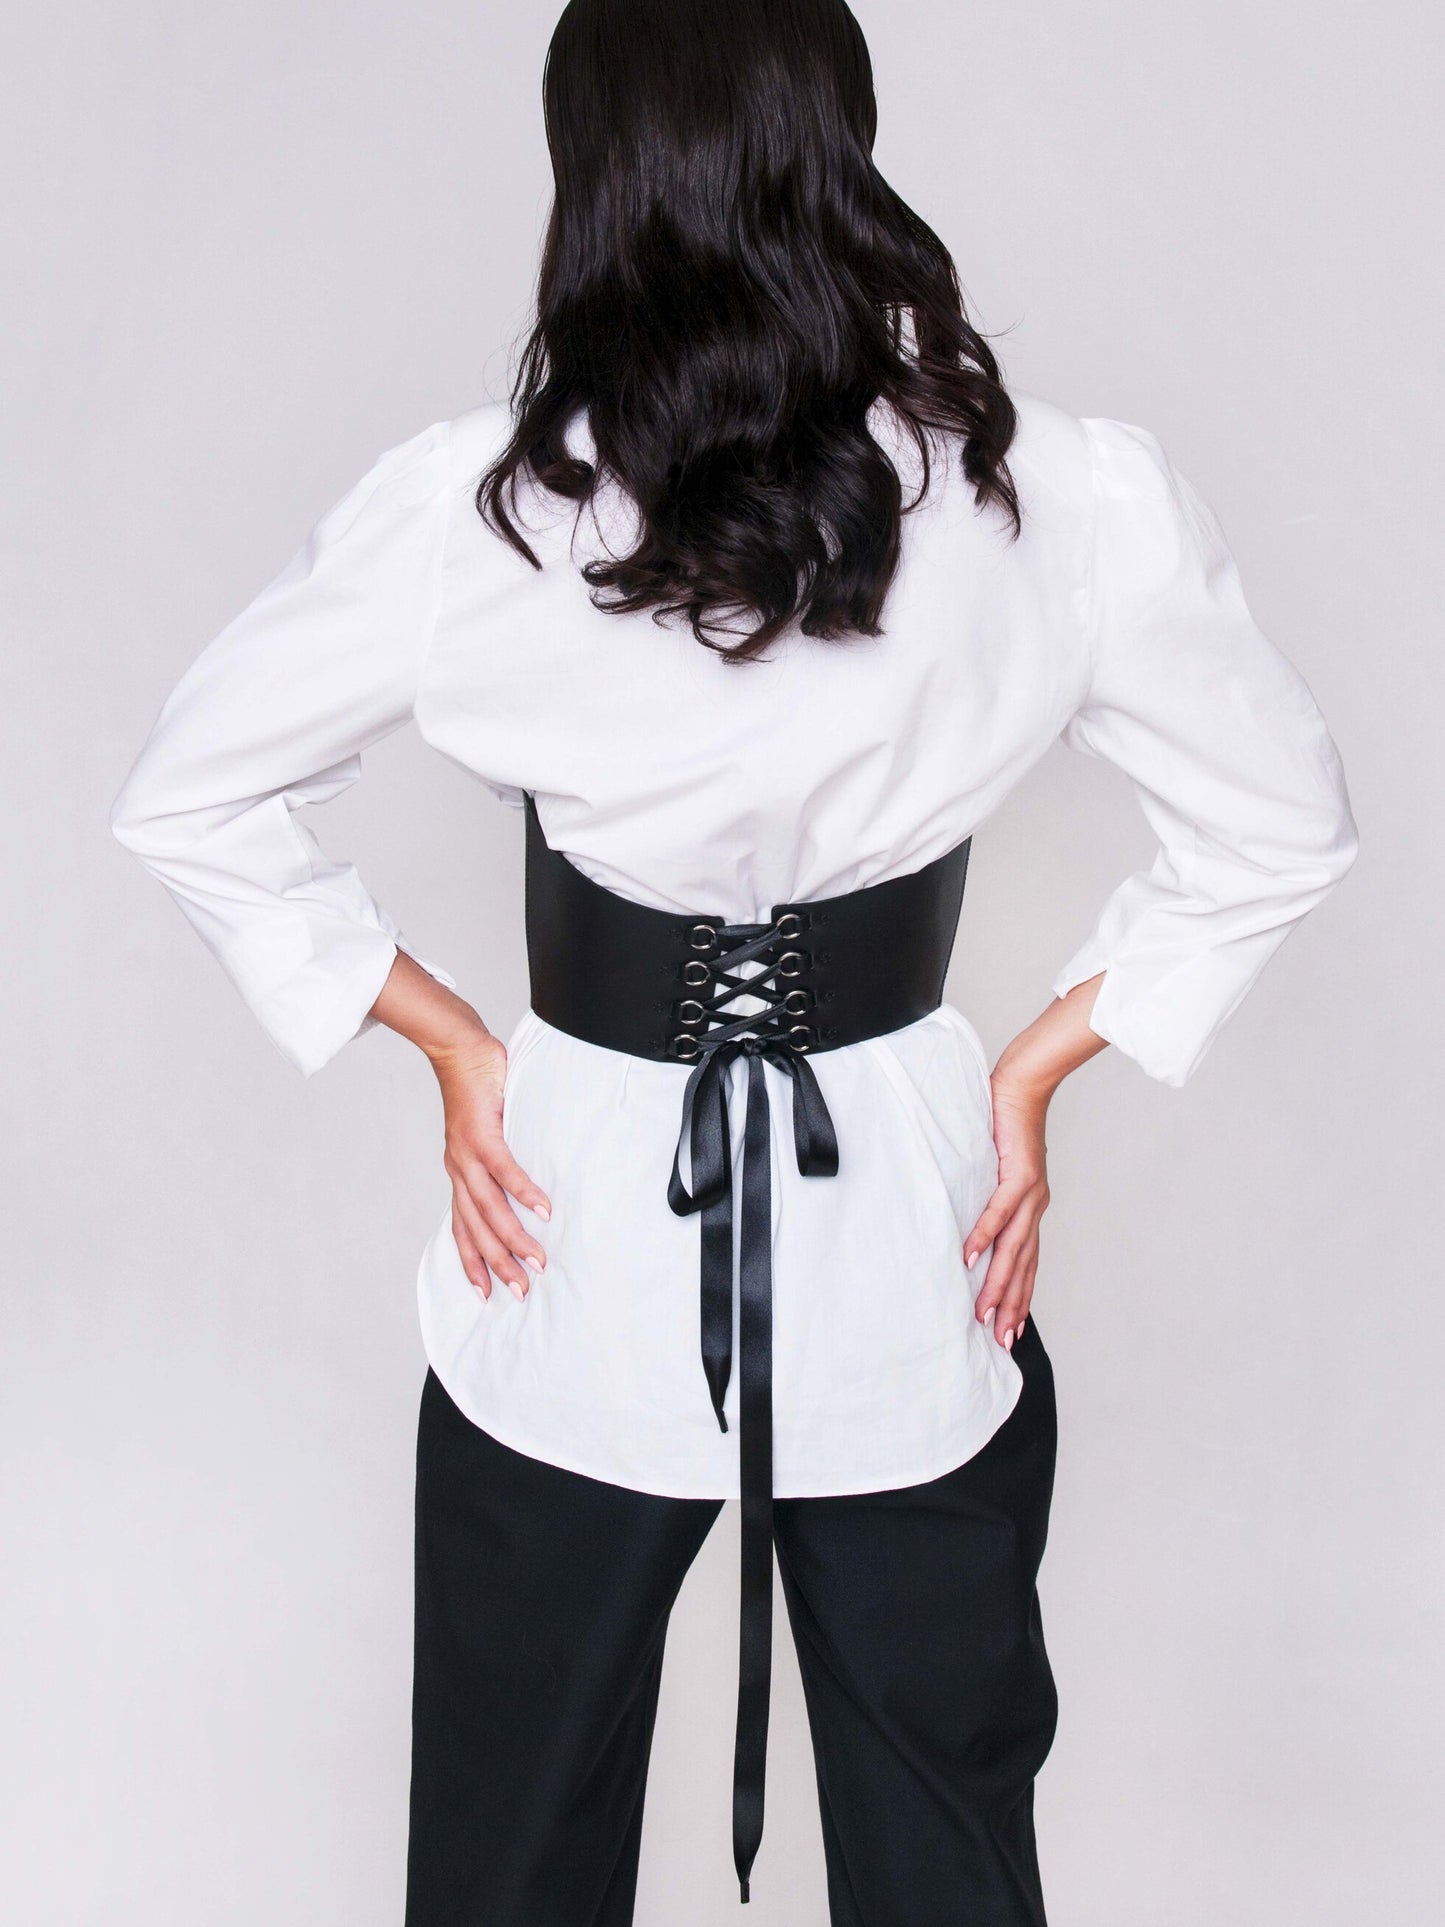 Back view of underbust corset lacing worn by woman.